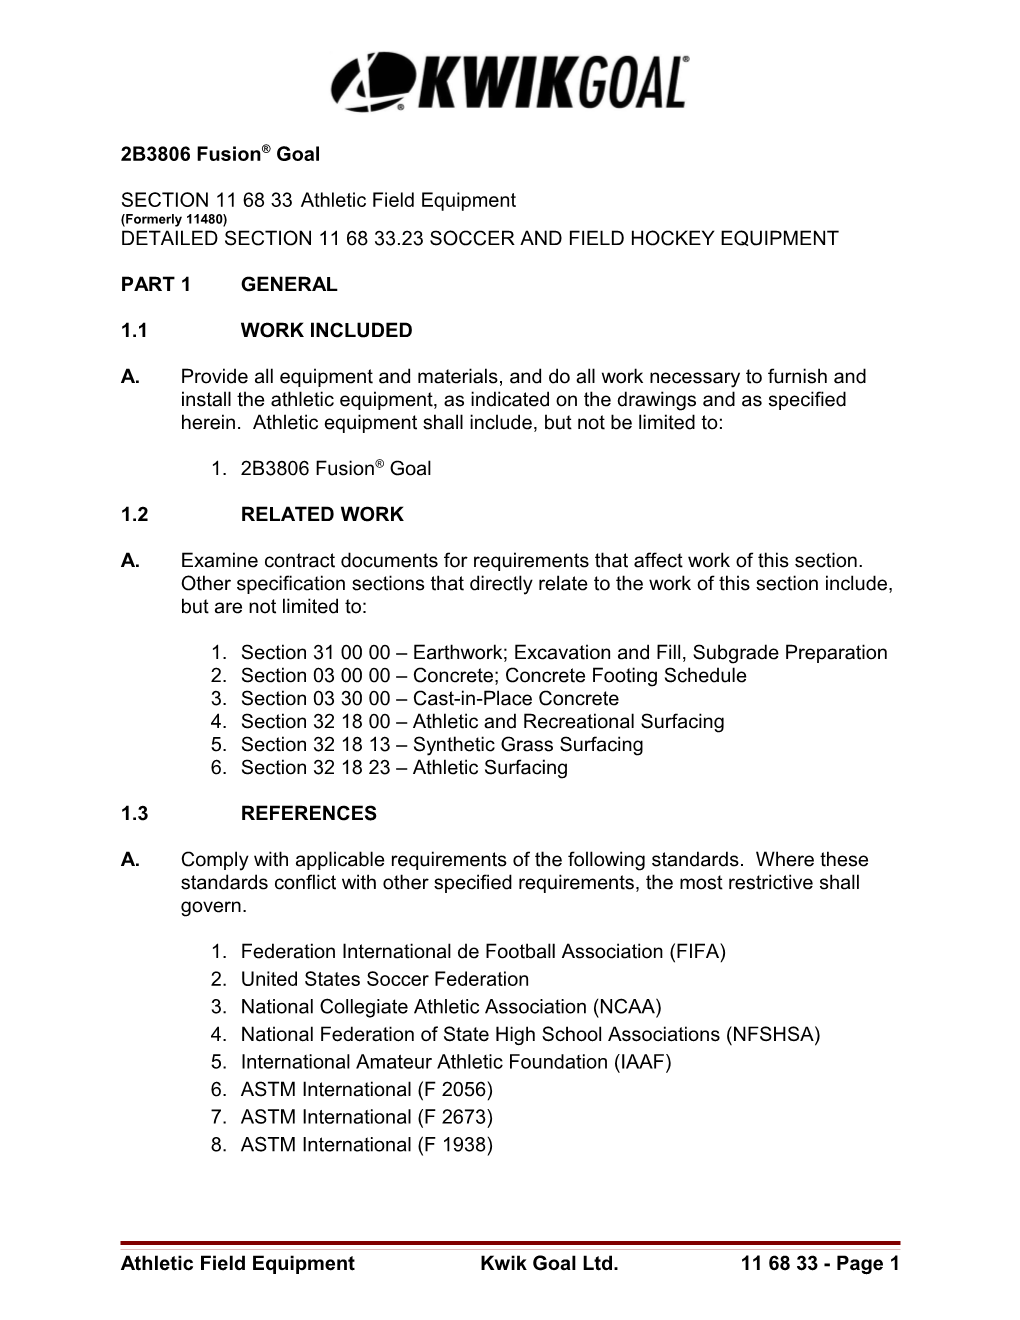 Detailed Section 11 68 33.23 Soccer and Field Hockey Equipment